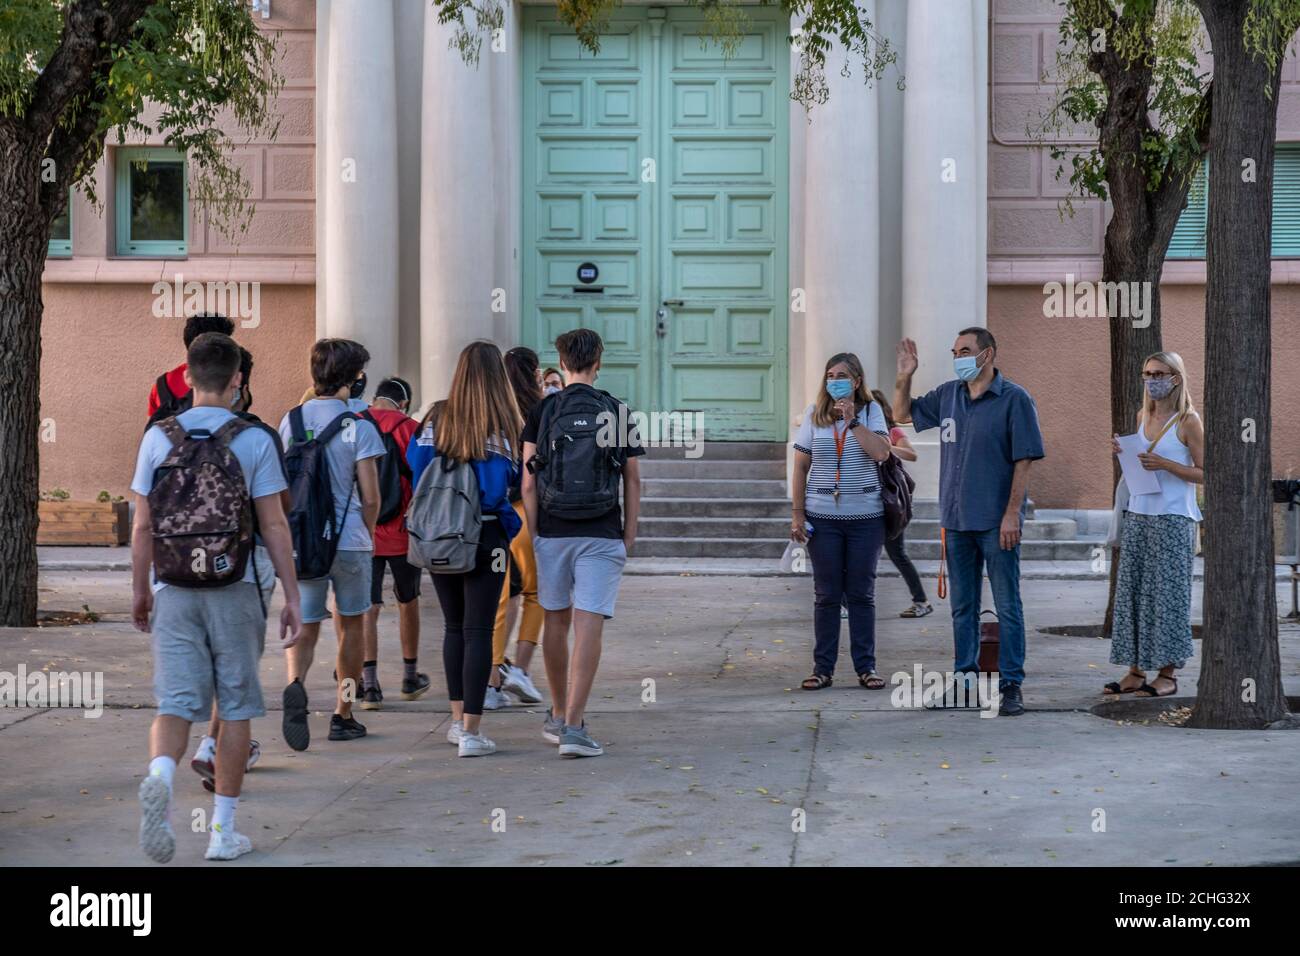 Barcelona, Spain. 14th Sep, 2020. A team of teachers of the Pau Claris Institute seen welcoming students on the first day of class.The school year begins in Catalonia between hygienic security measures and mandatory distancing of students due to the Covid pandemic. Credit: SOPA Images Limited/Alamy Live News Stock Photo